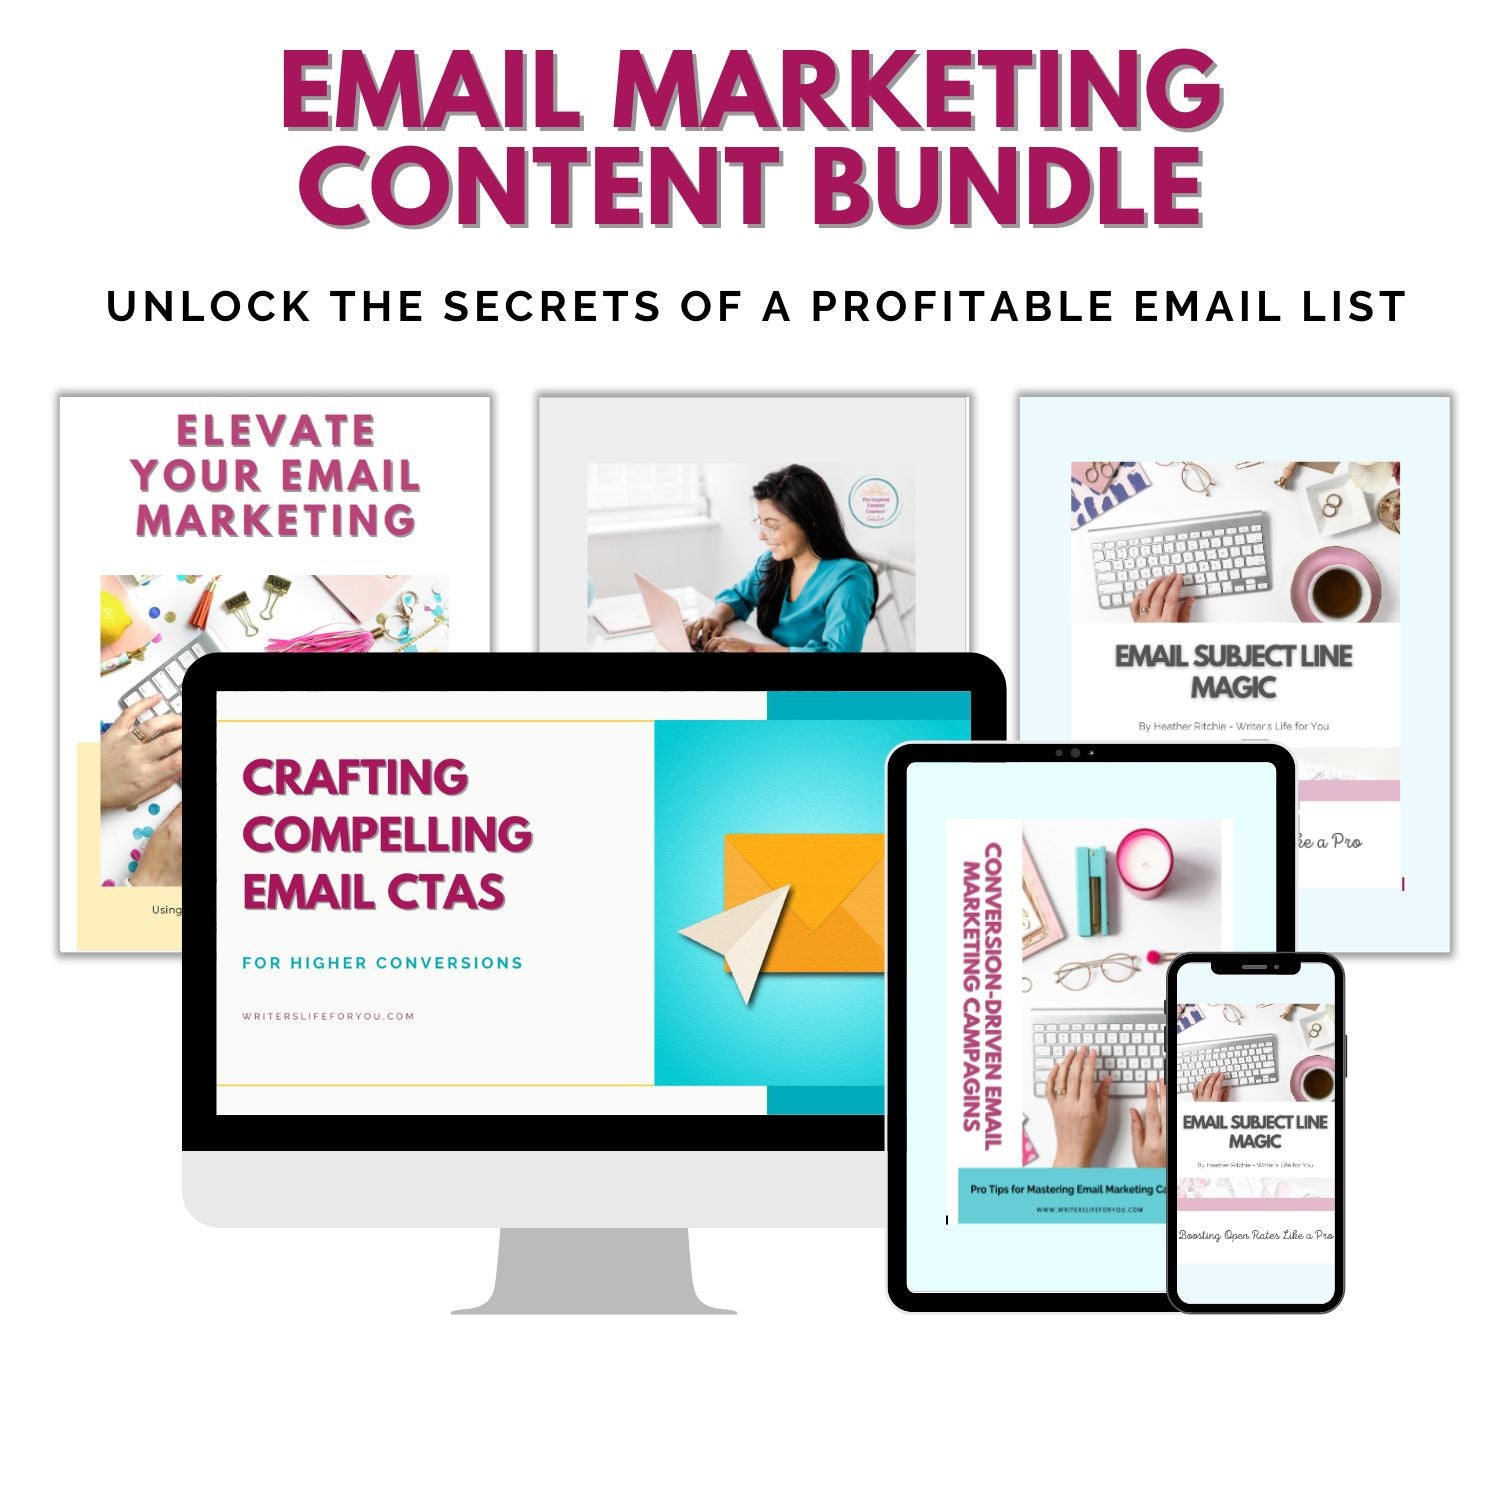 The Email Marketing Content Bundle with Email Subject Line Magic, Elevate Your Email With Irresistible Preheaders, Conversion-Driven Email Campaigns and more.